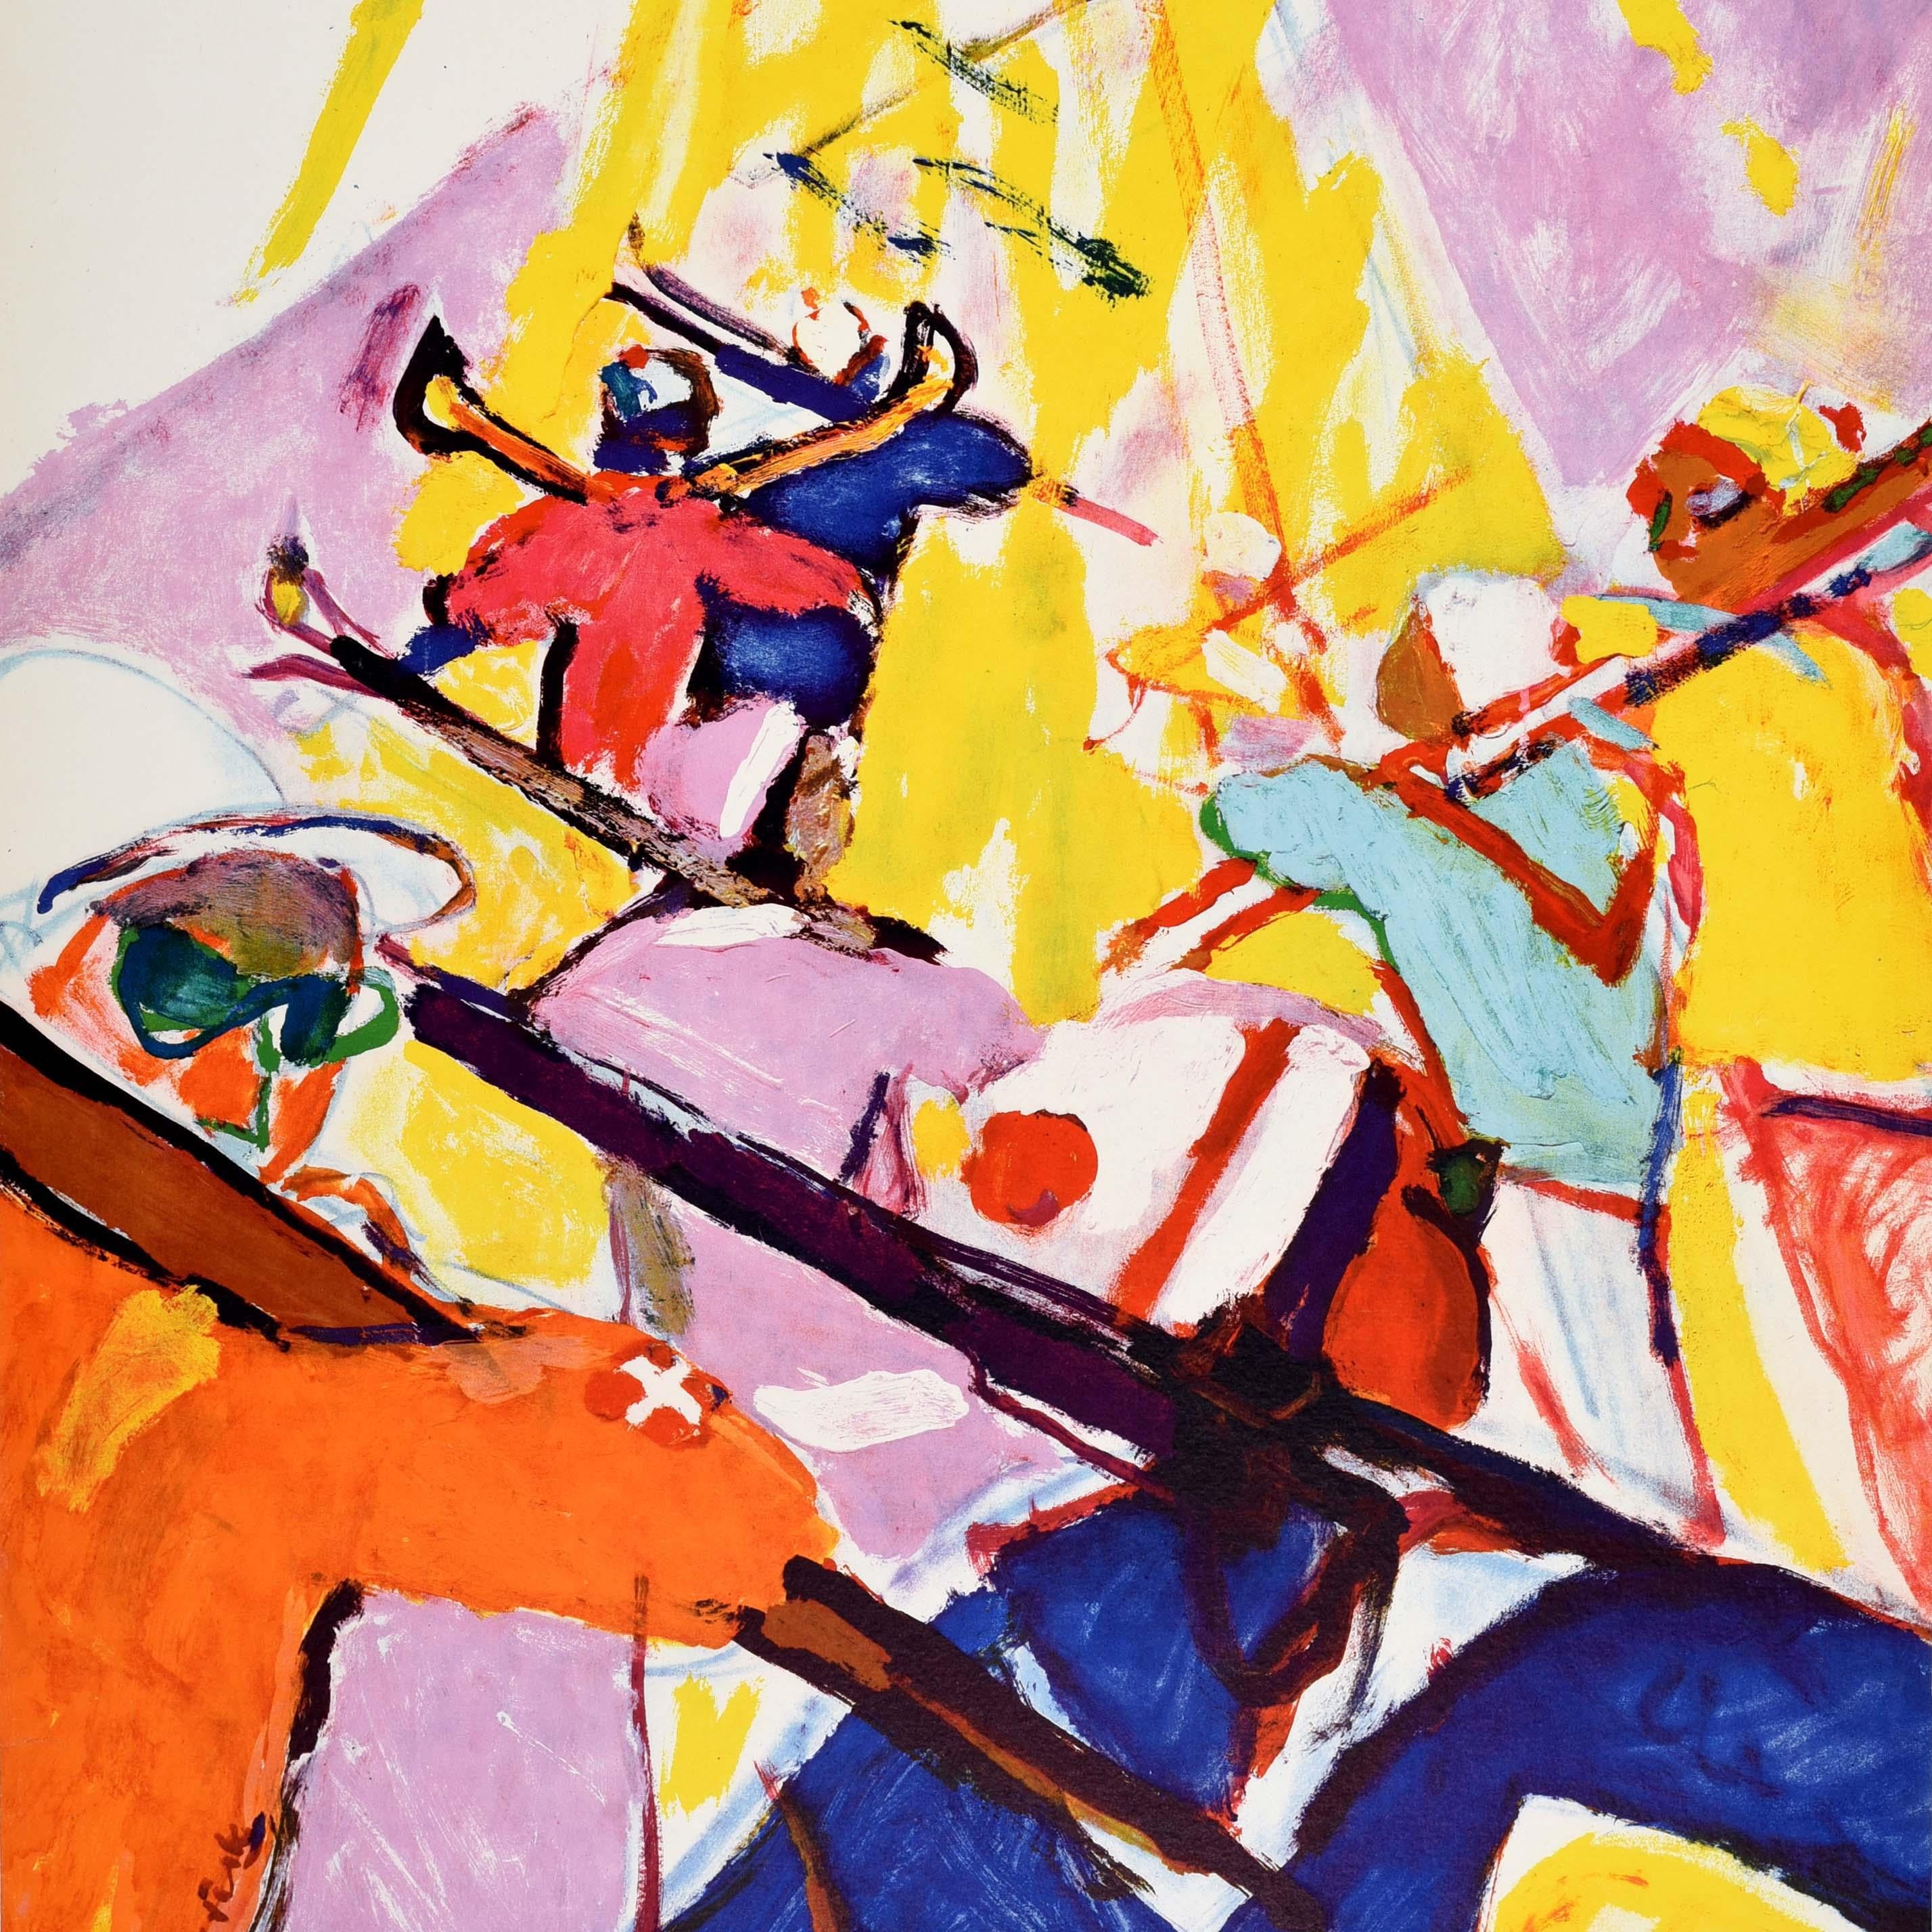 Original vintage winter sport and skiing poster - Sport Au Soleil En Suisse / Sport In The Sun In Switzerland - featuring colourful artwork by the notable artist Hans Falk (1918-2002) of a group of skiers holding their skis over their shoulders as